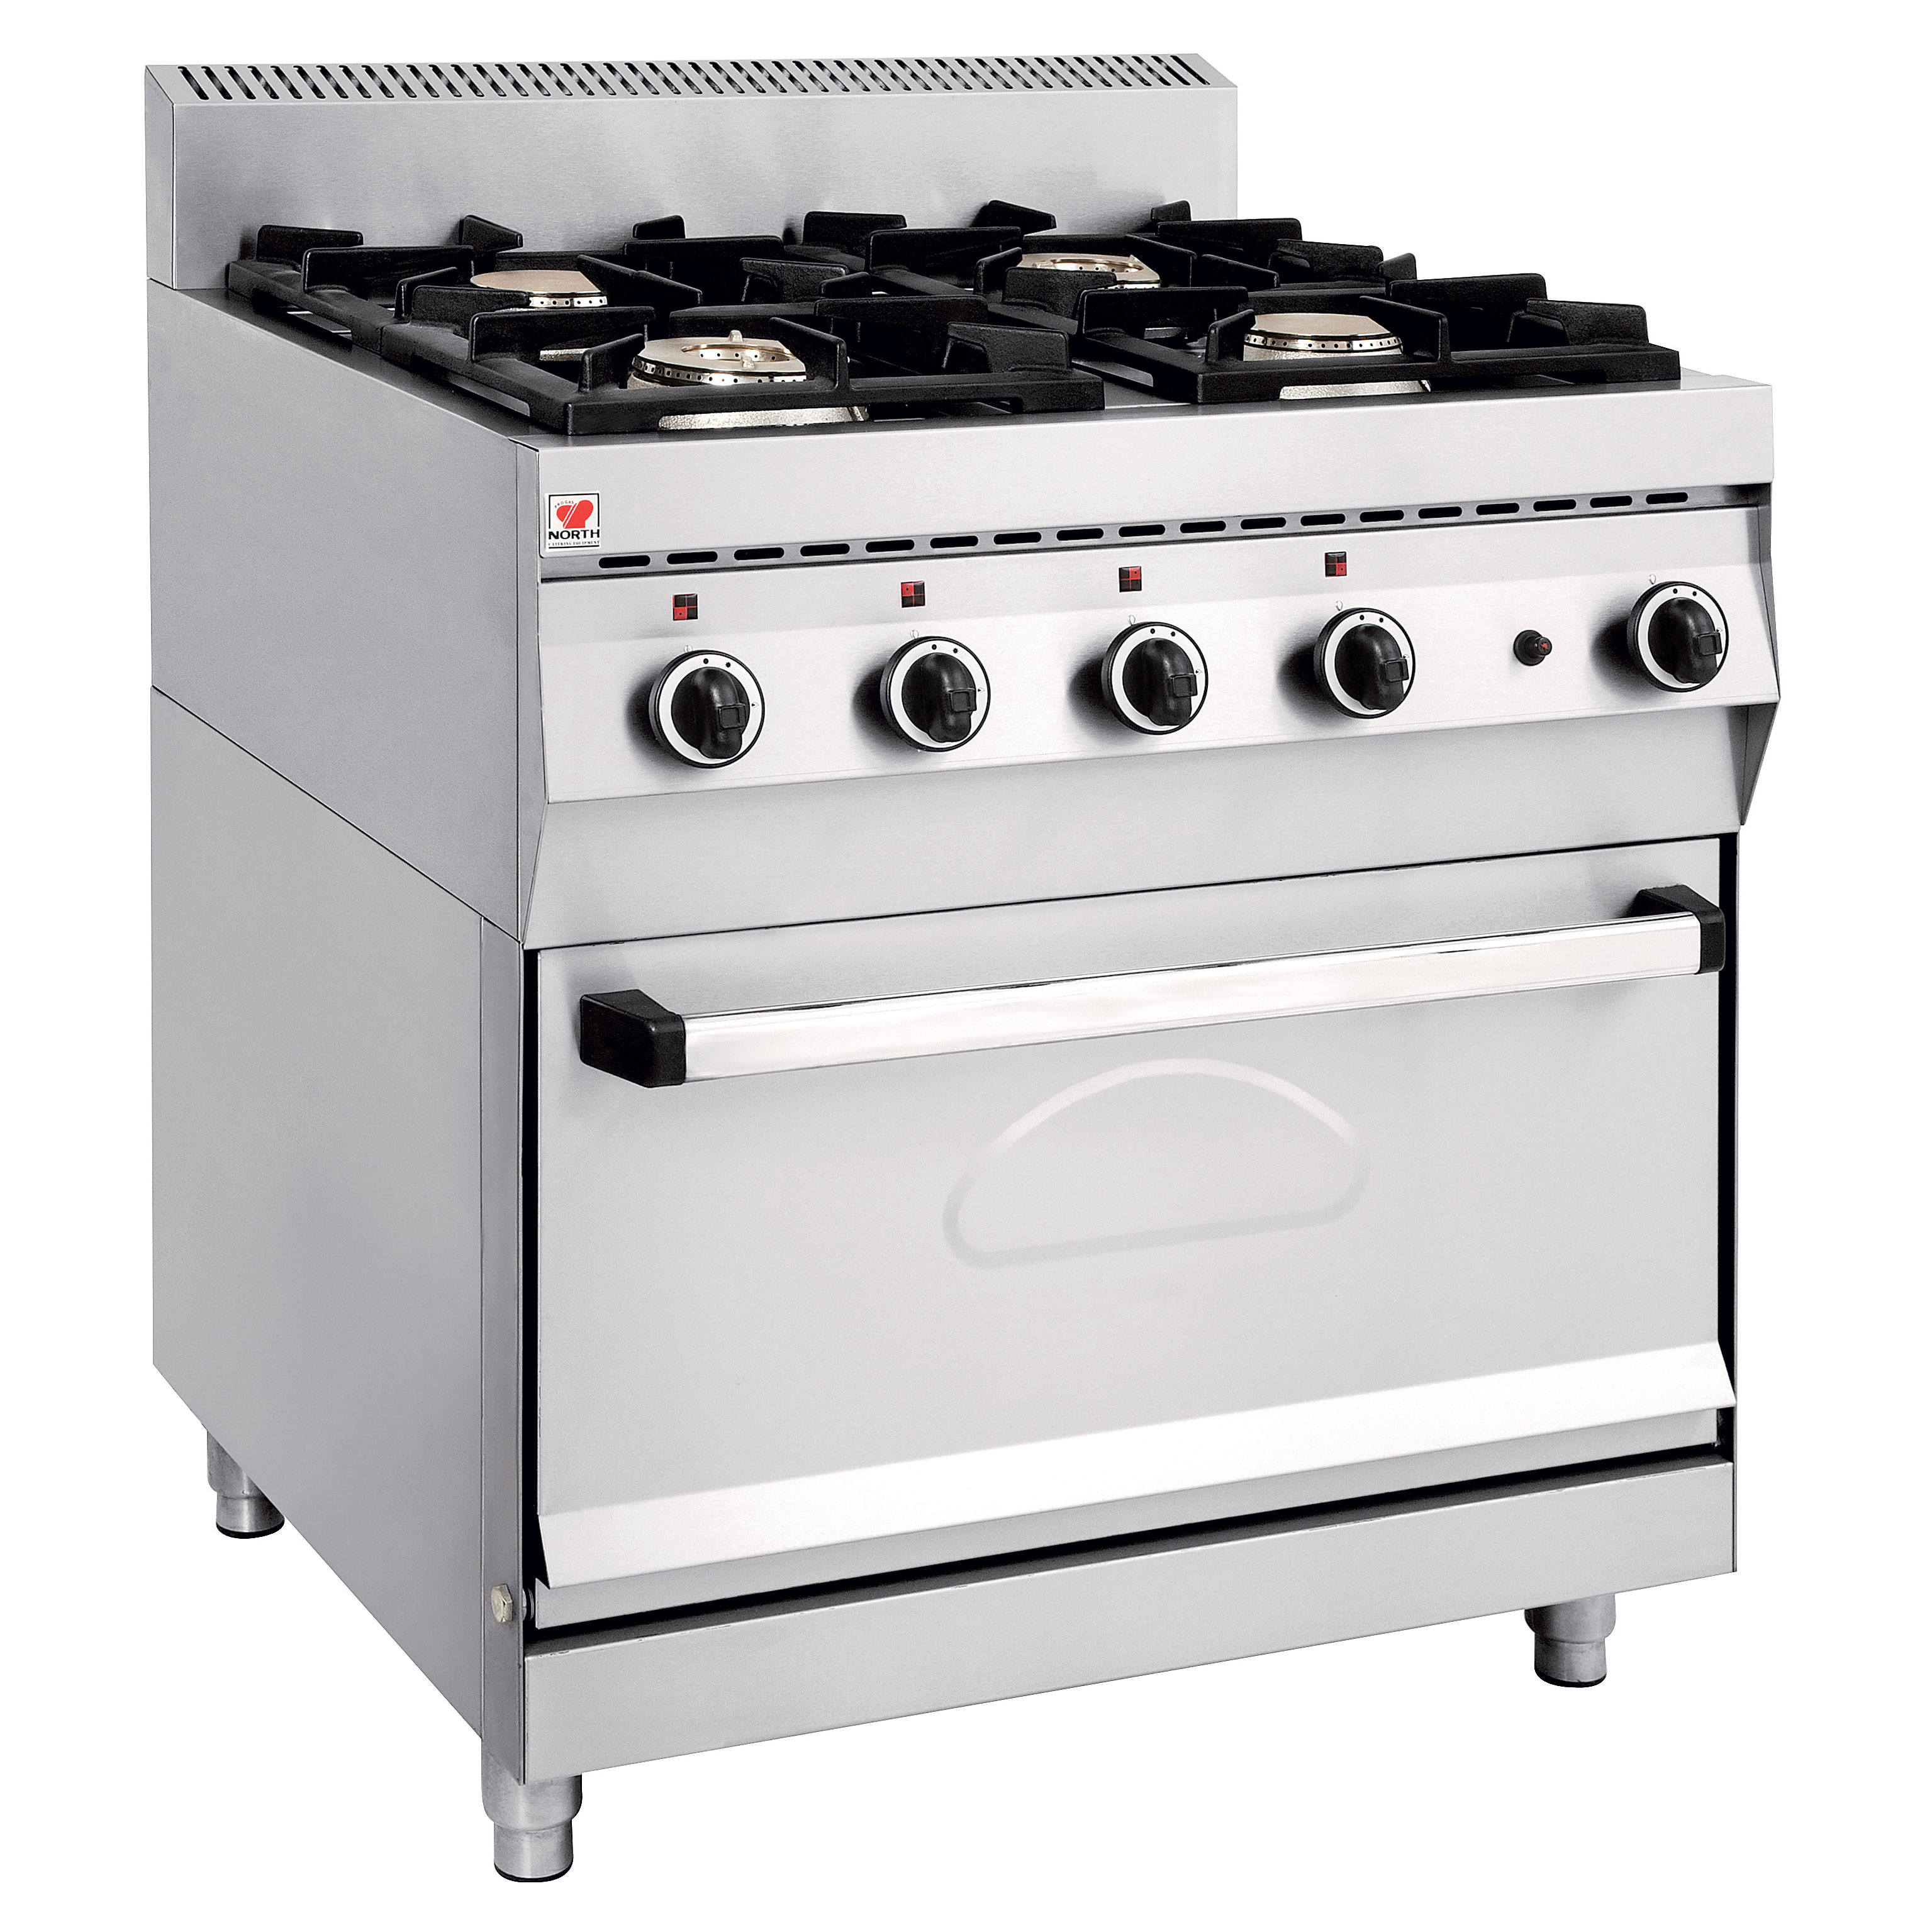 elgas-gas-cooker-with-electric-hot-air-oven-north-catering-equipment